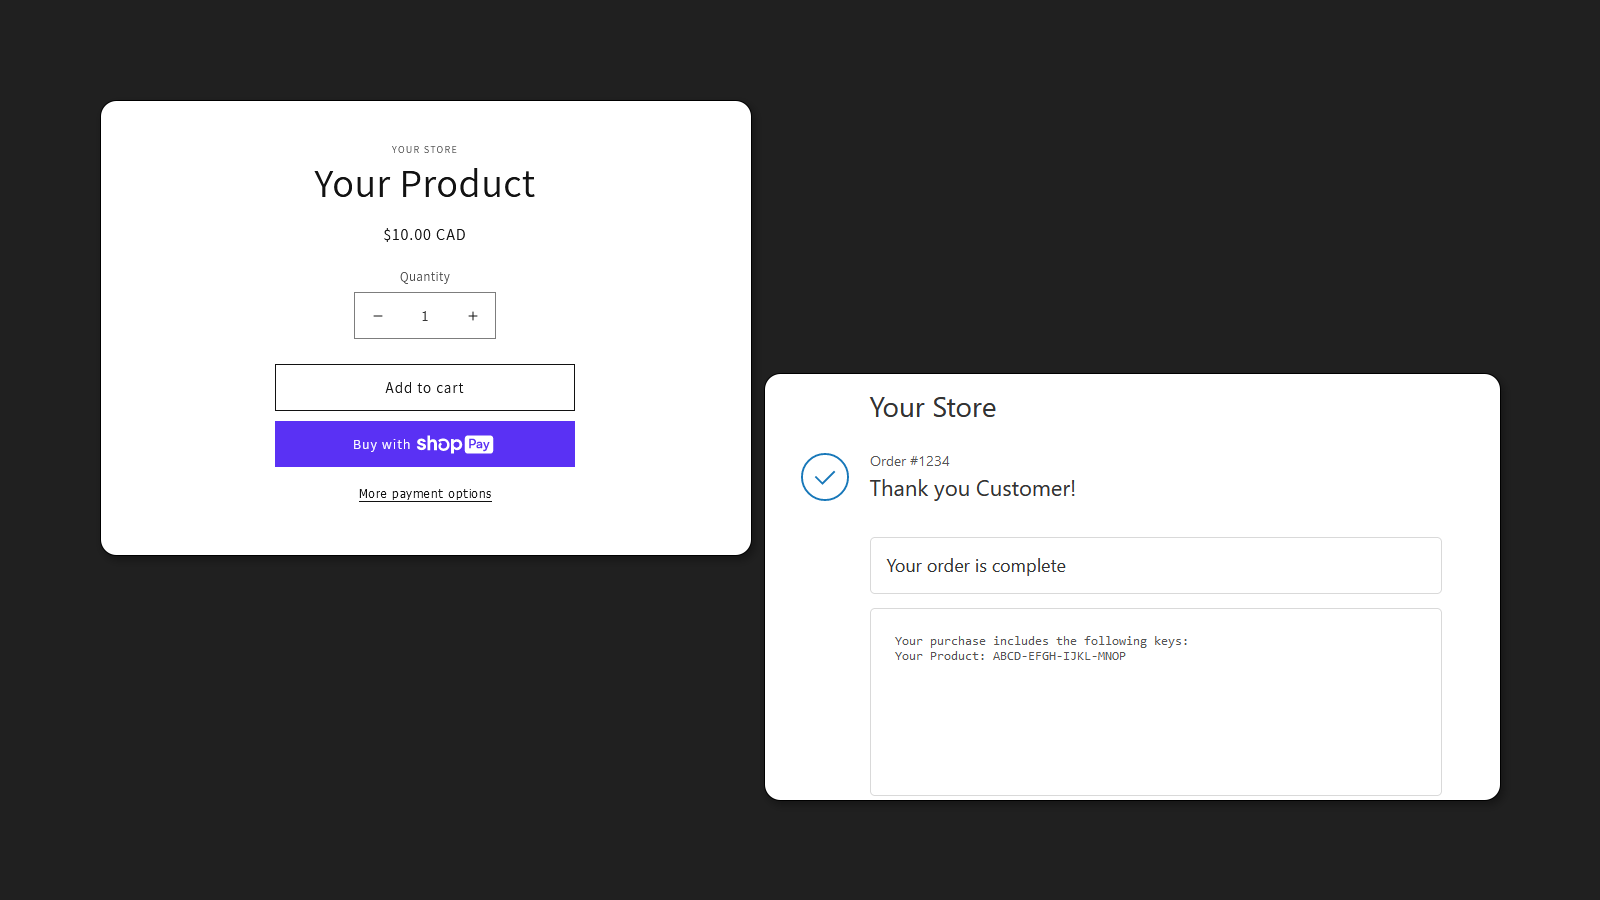 Product and Thank You page with keys.